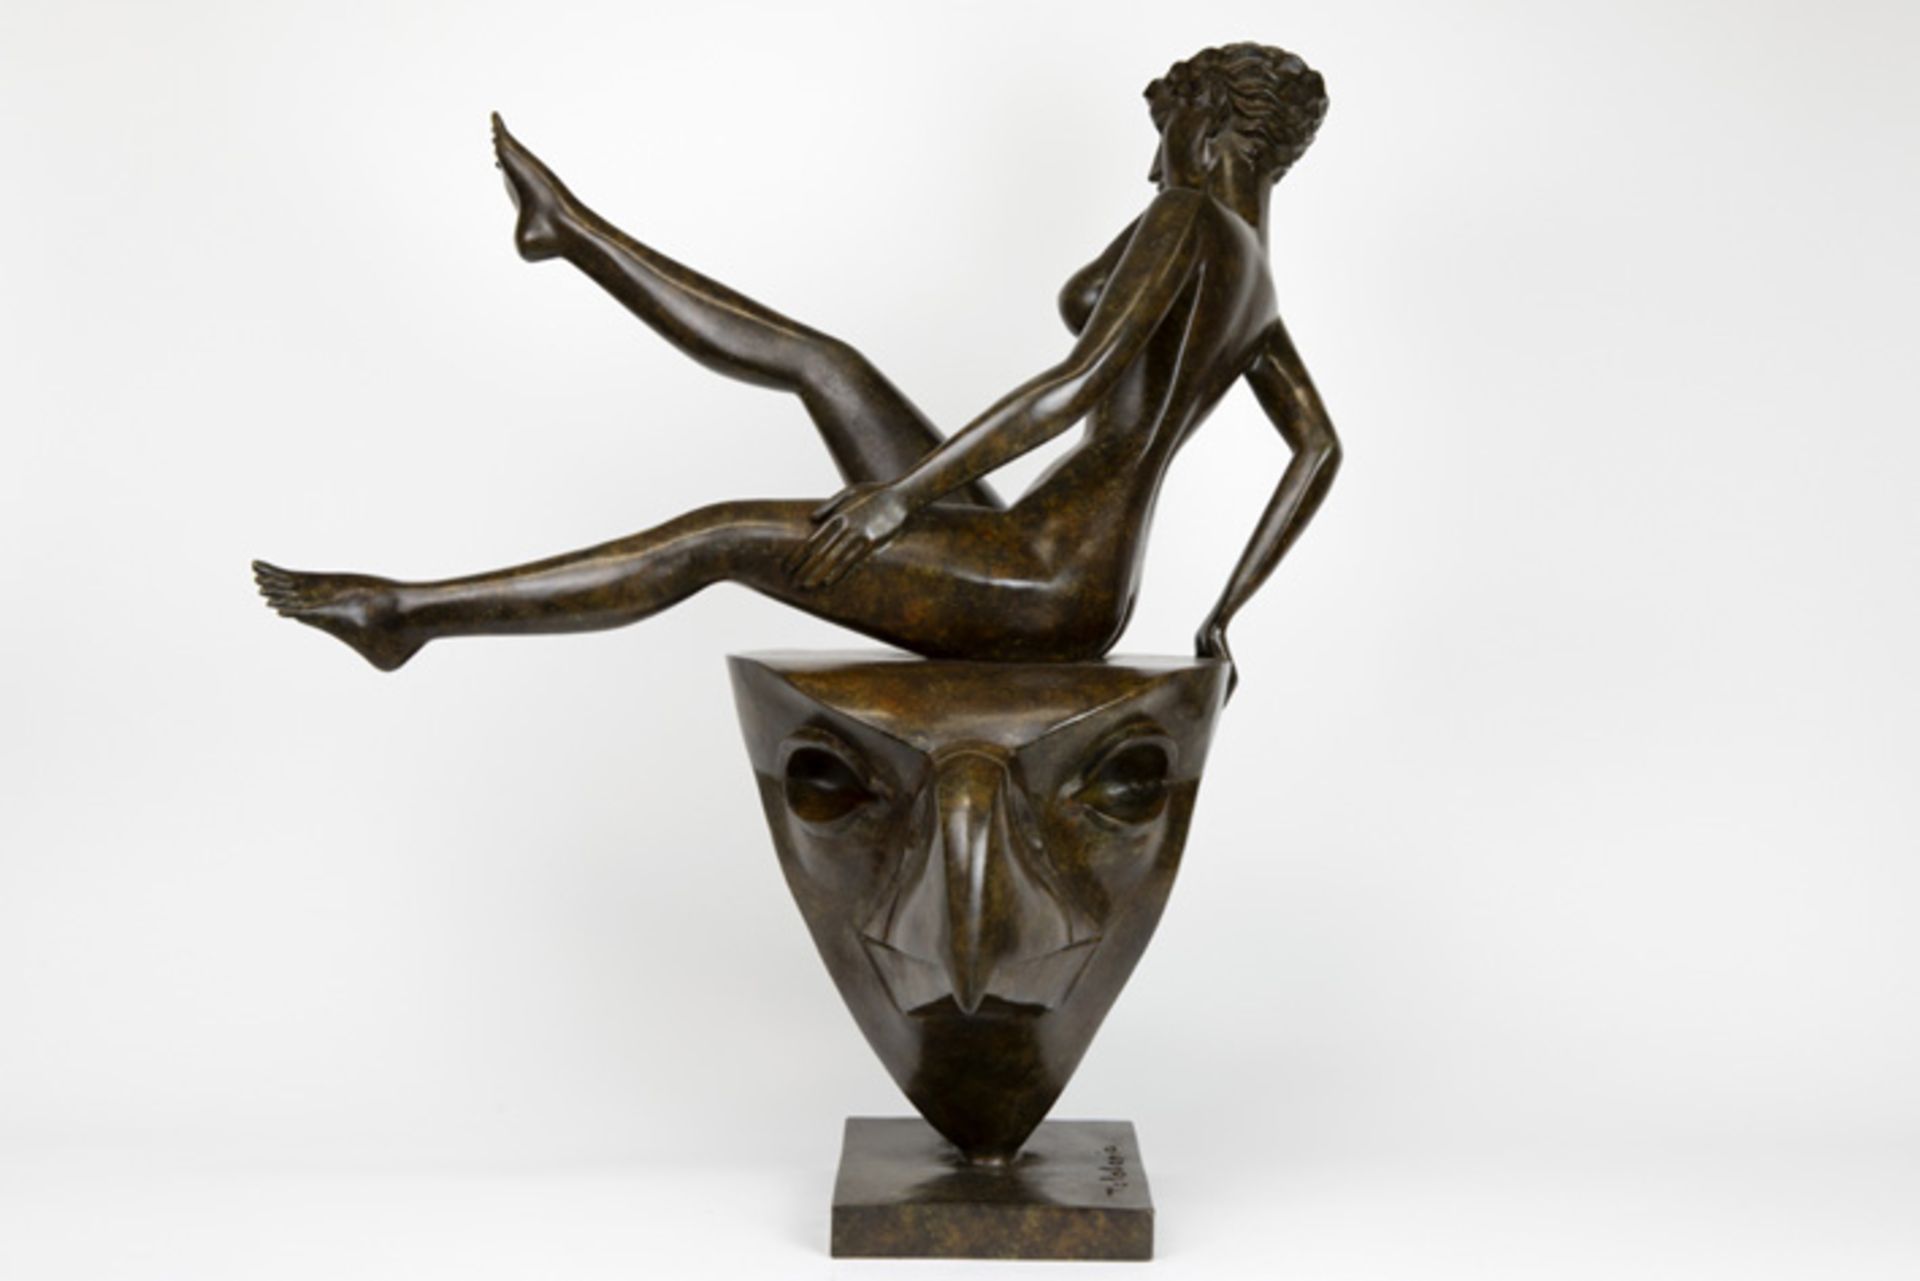 21st Cent. "Lady on the top" sculpture in bronze - signed Igor Tcholaria and with foundry mark - Image 4 of 5